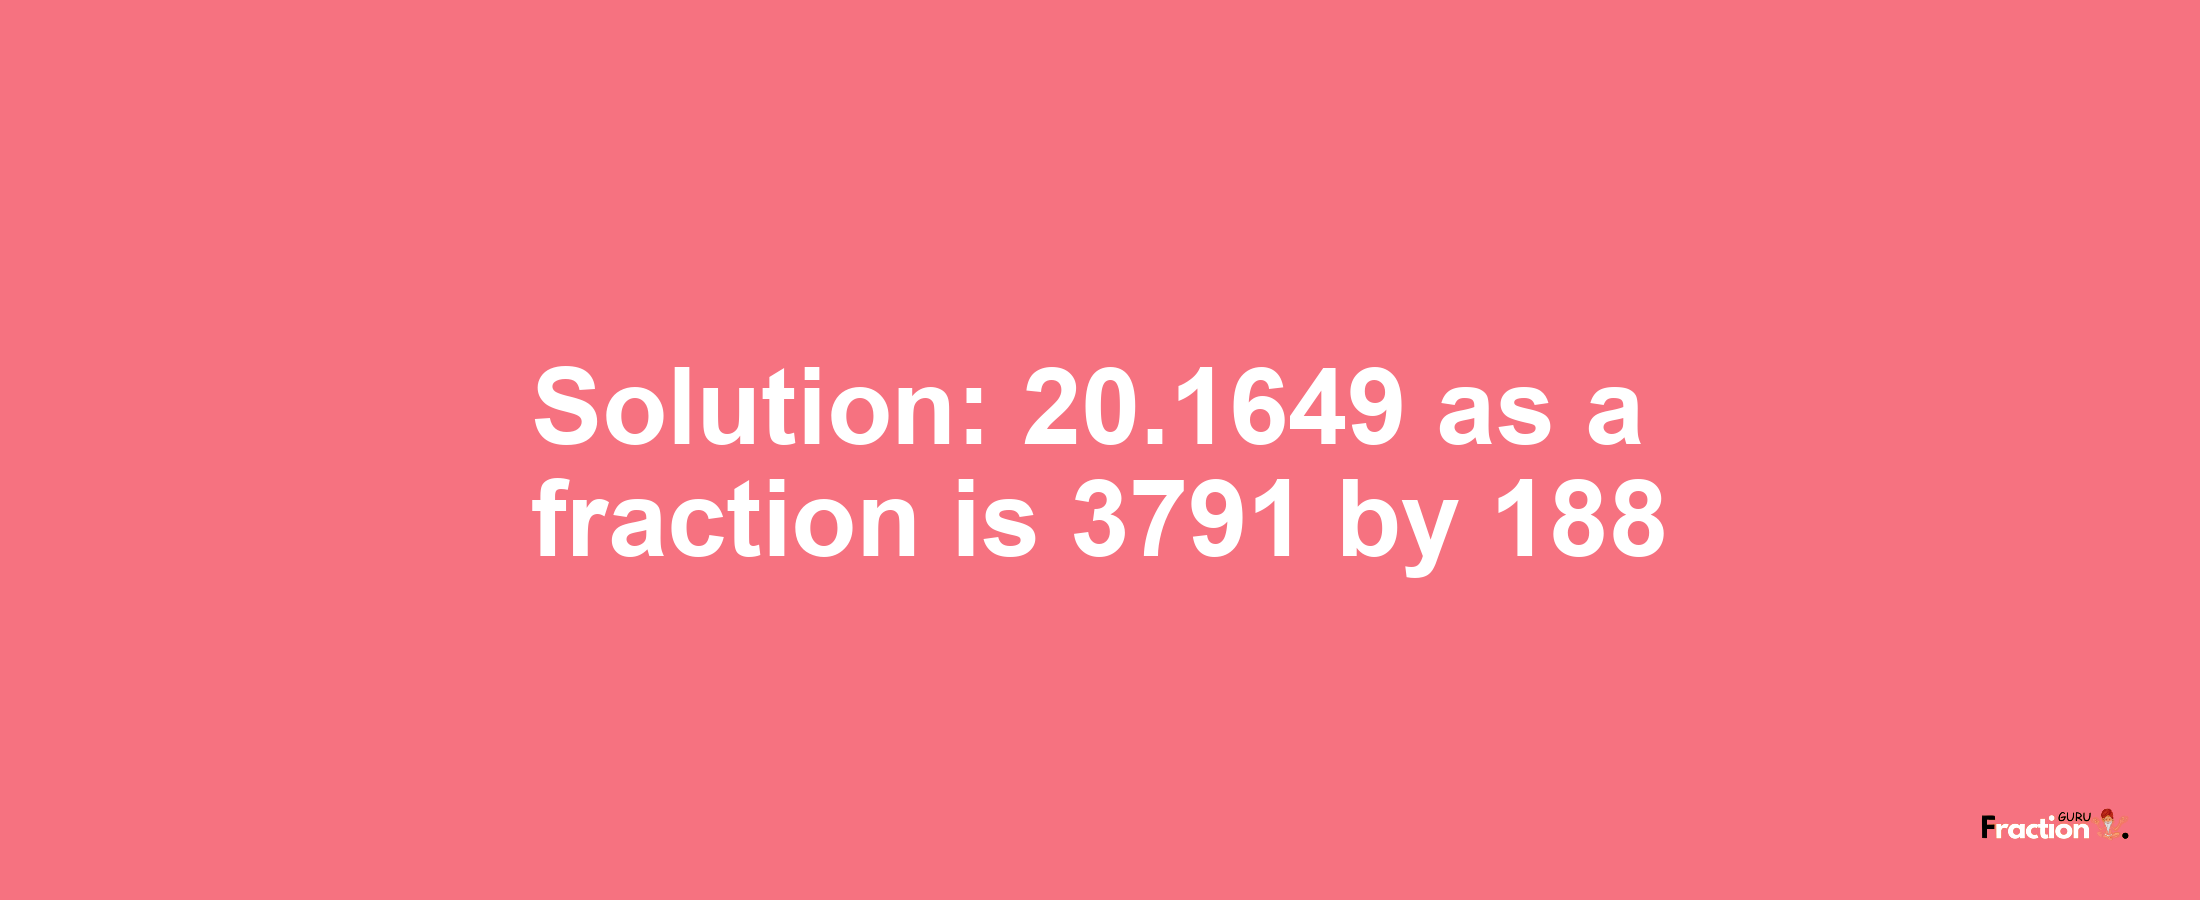 Solution:20.1649 as a fraction is 3791/188